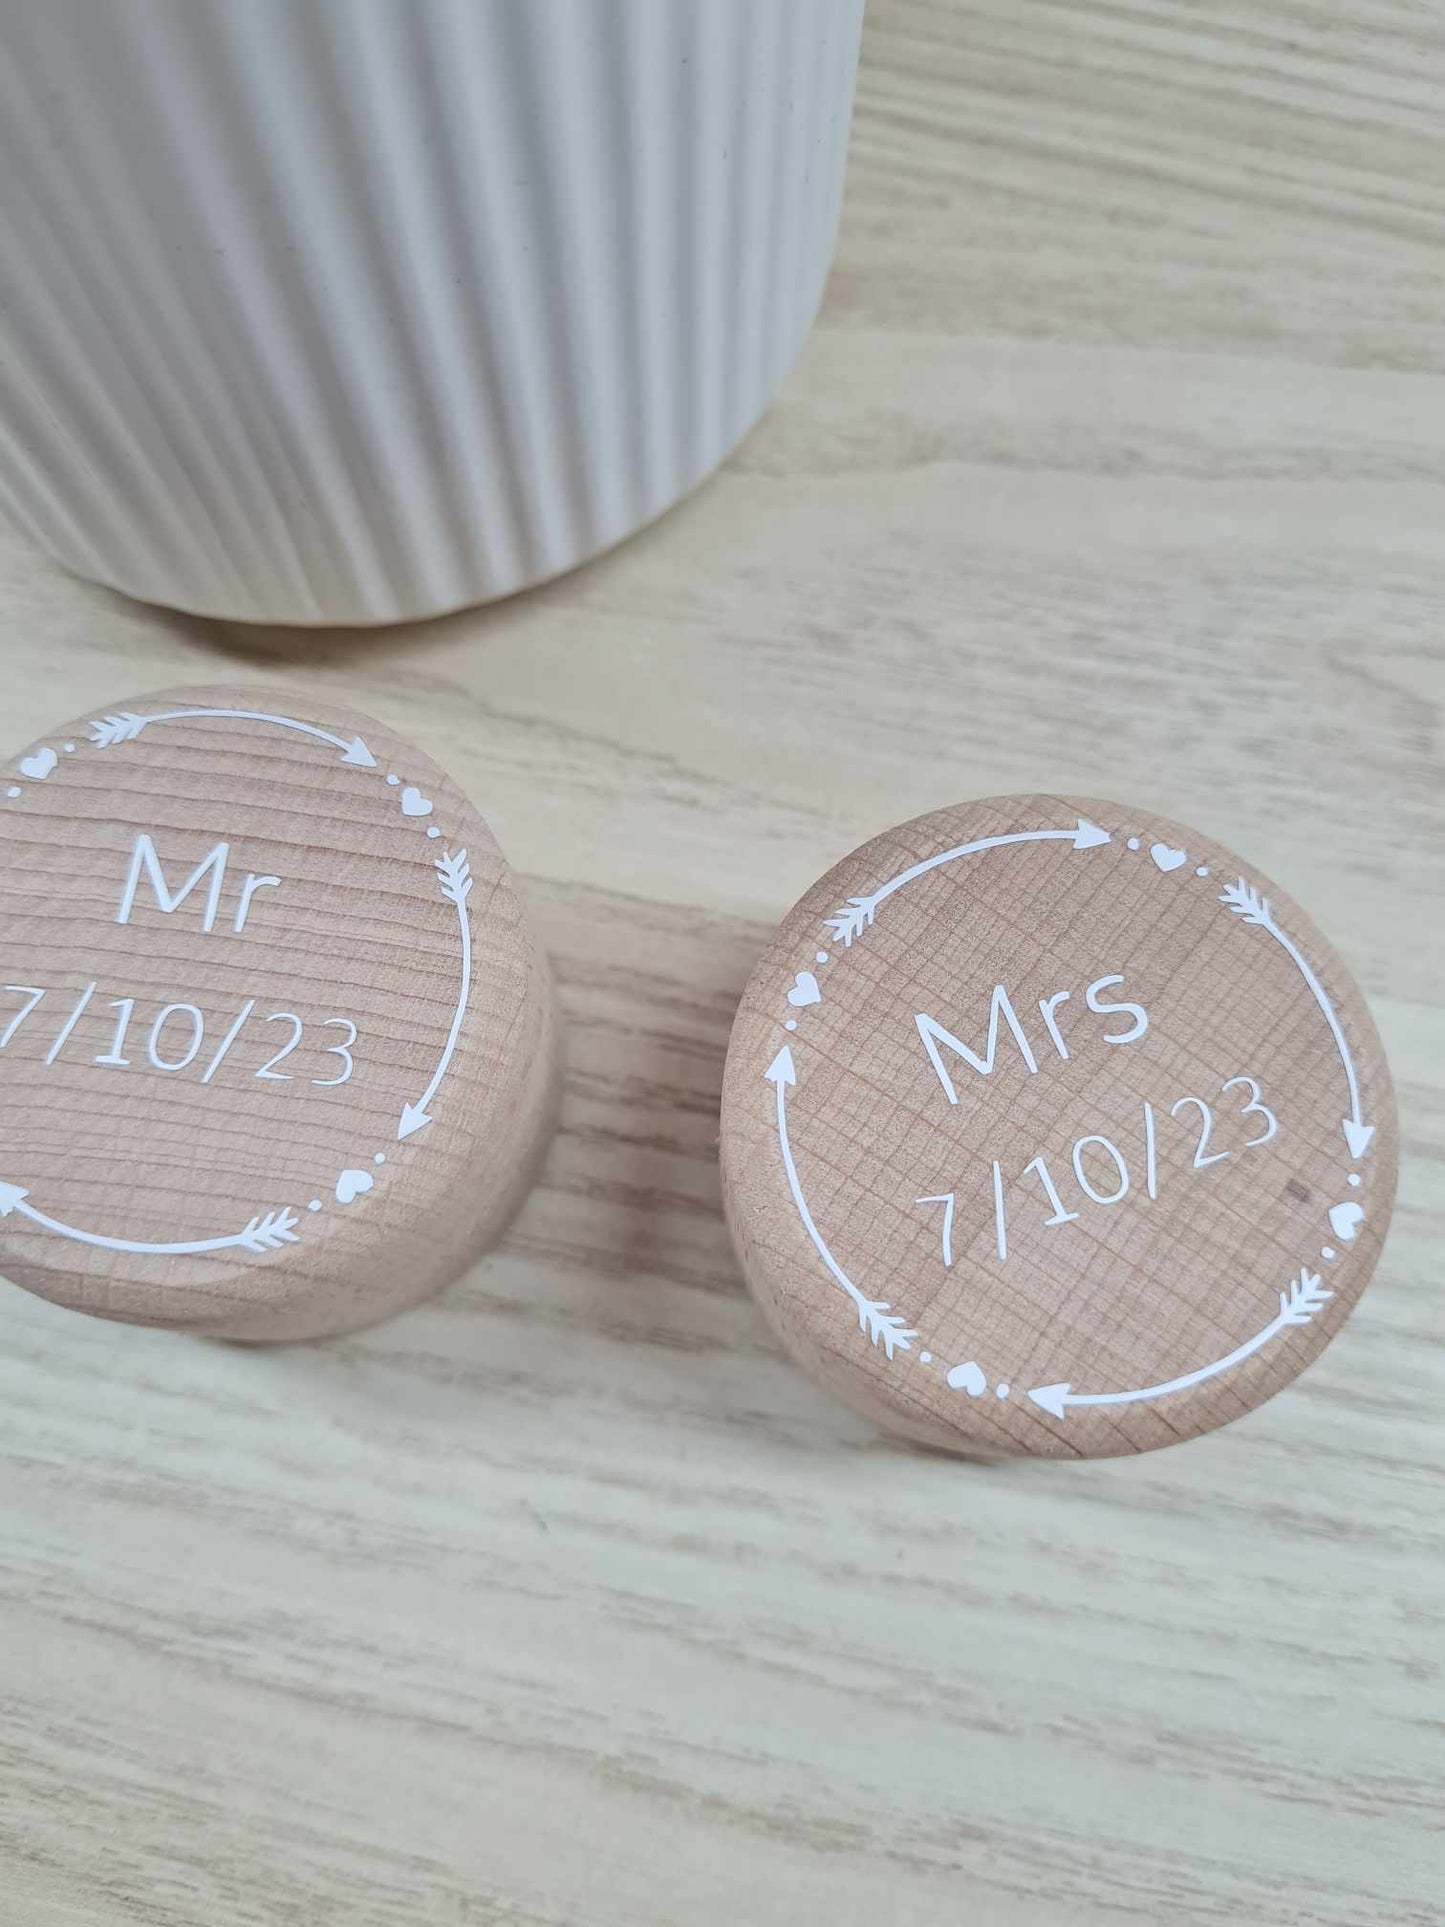 Mr/ Mrs Ring Box (Date) with Arrow Design